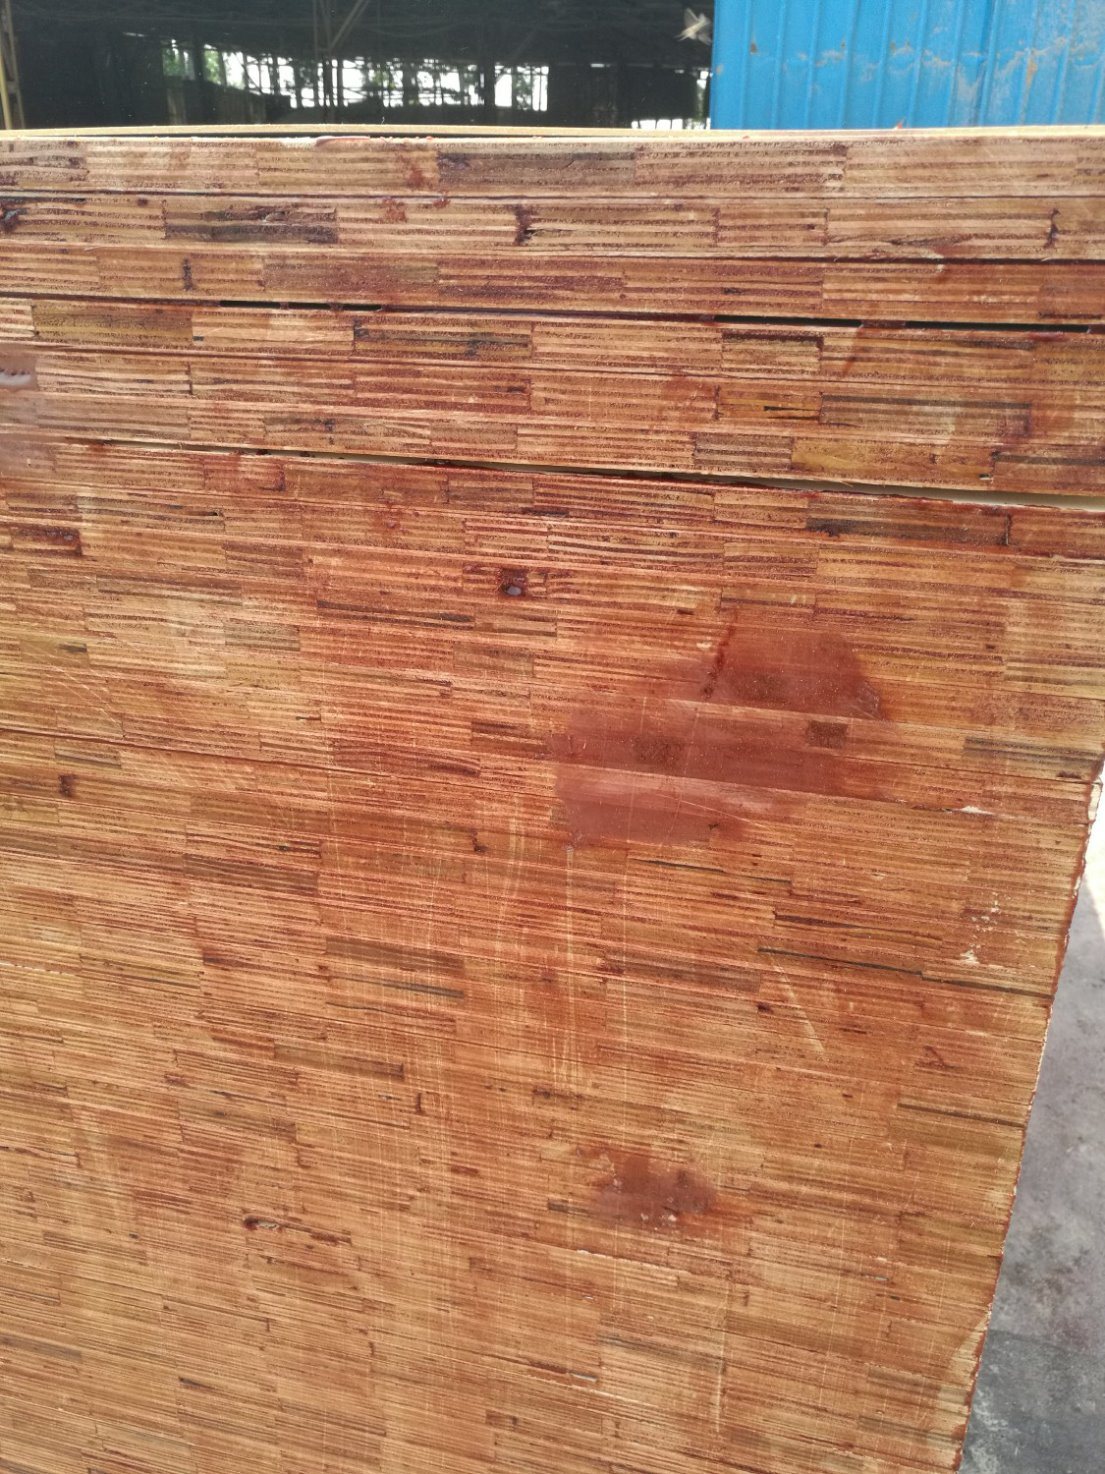 Reusage 5 Times Film Faced Plywood for Shuttering